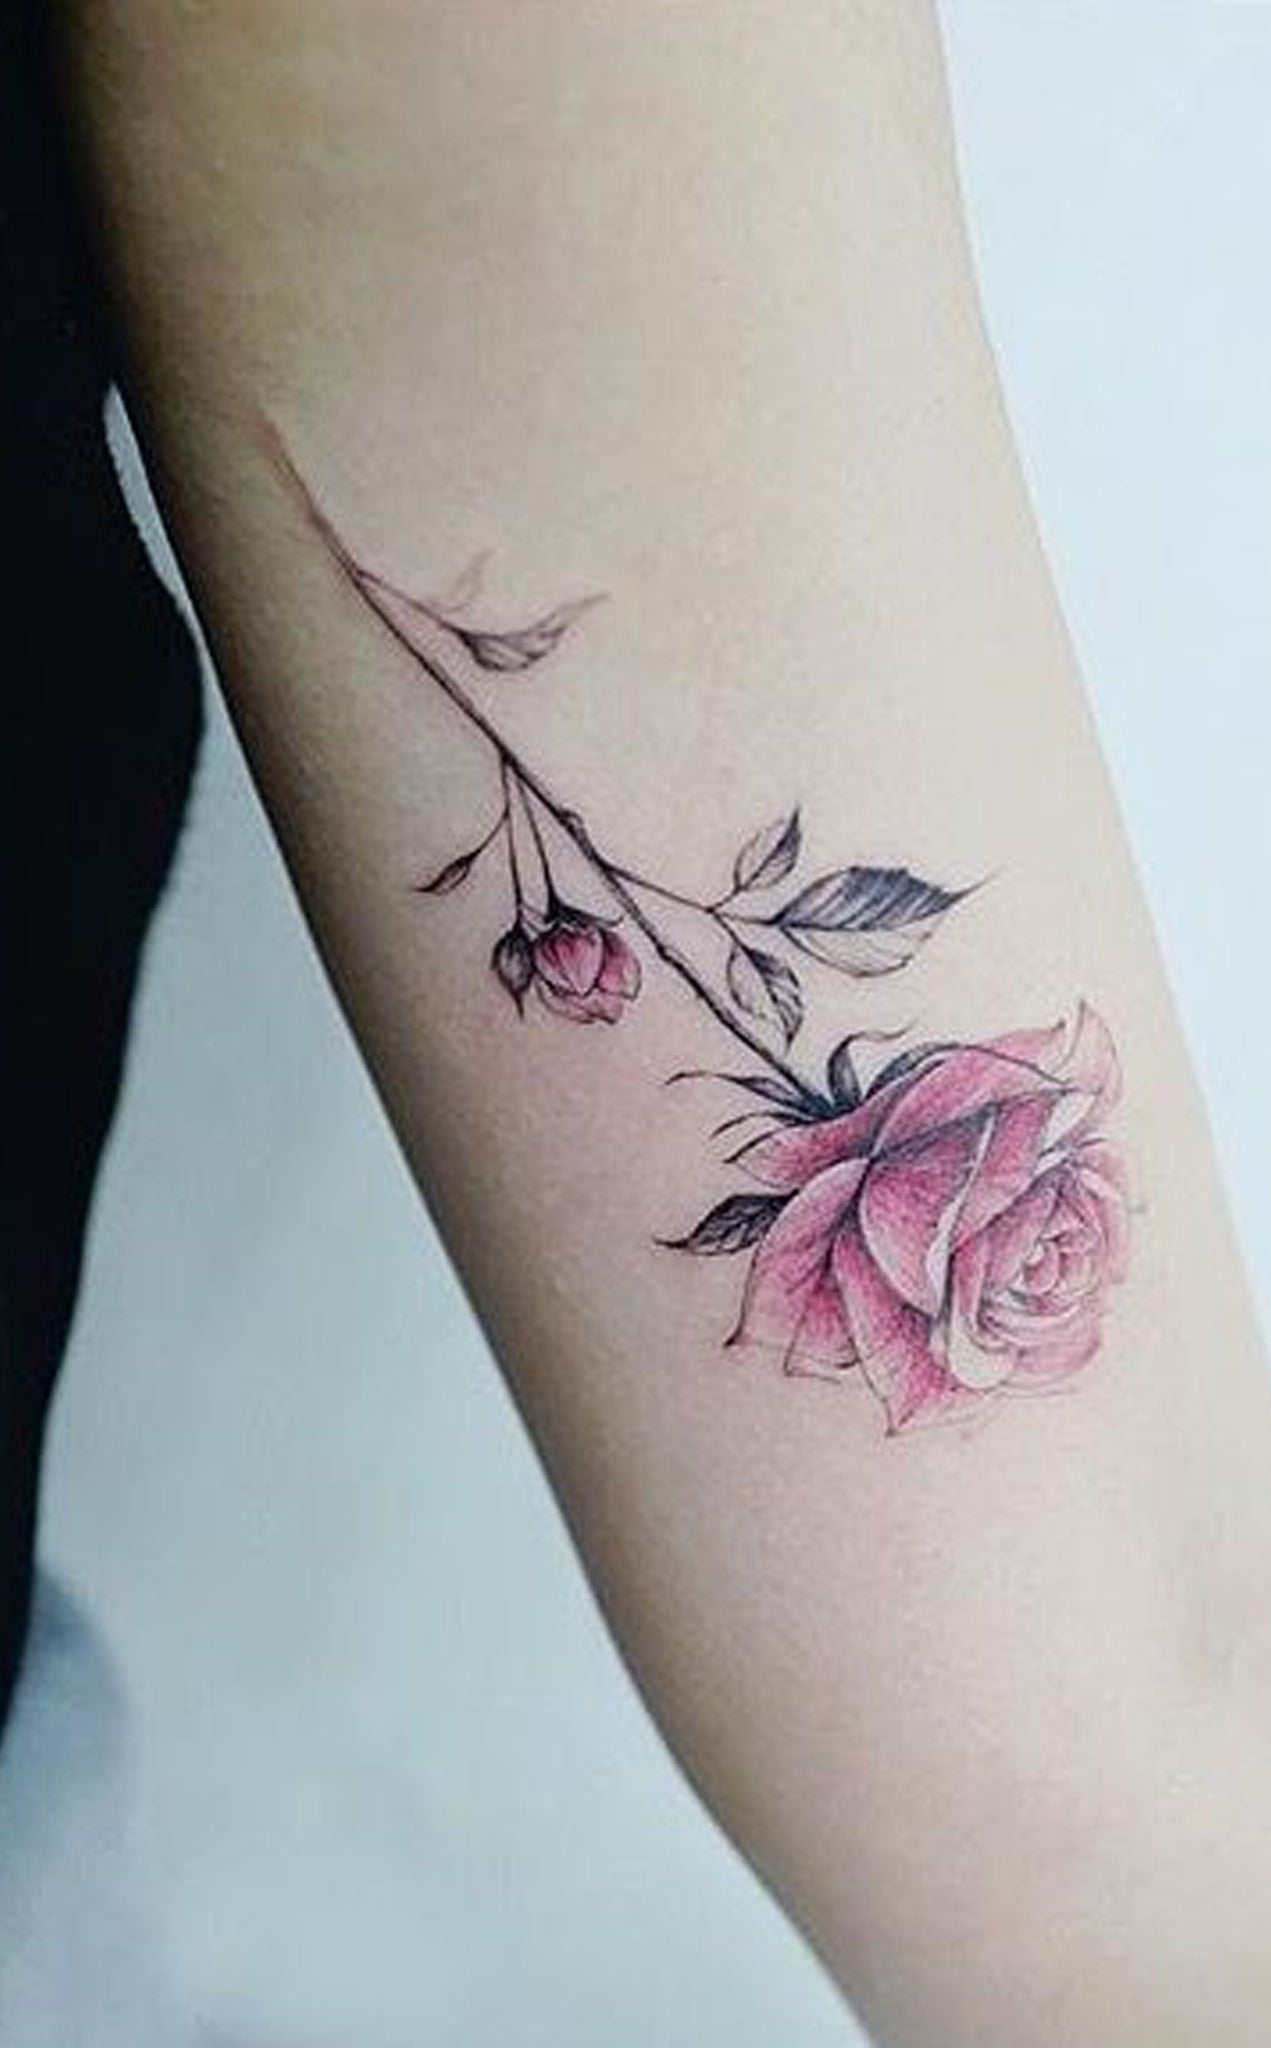 Watercolor Rose Arm Tattoo Ideas for Women - Small Colorful Flower Bicep Tat - www.MyBodiArt.com #tattoos